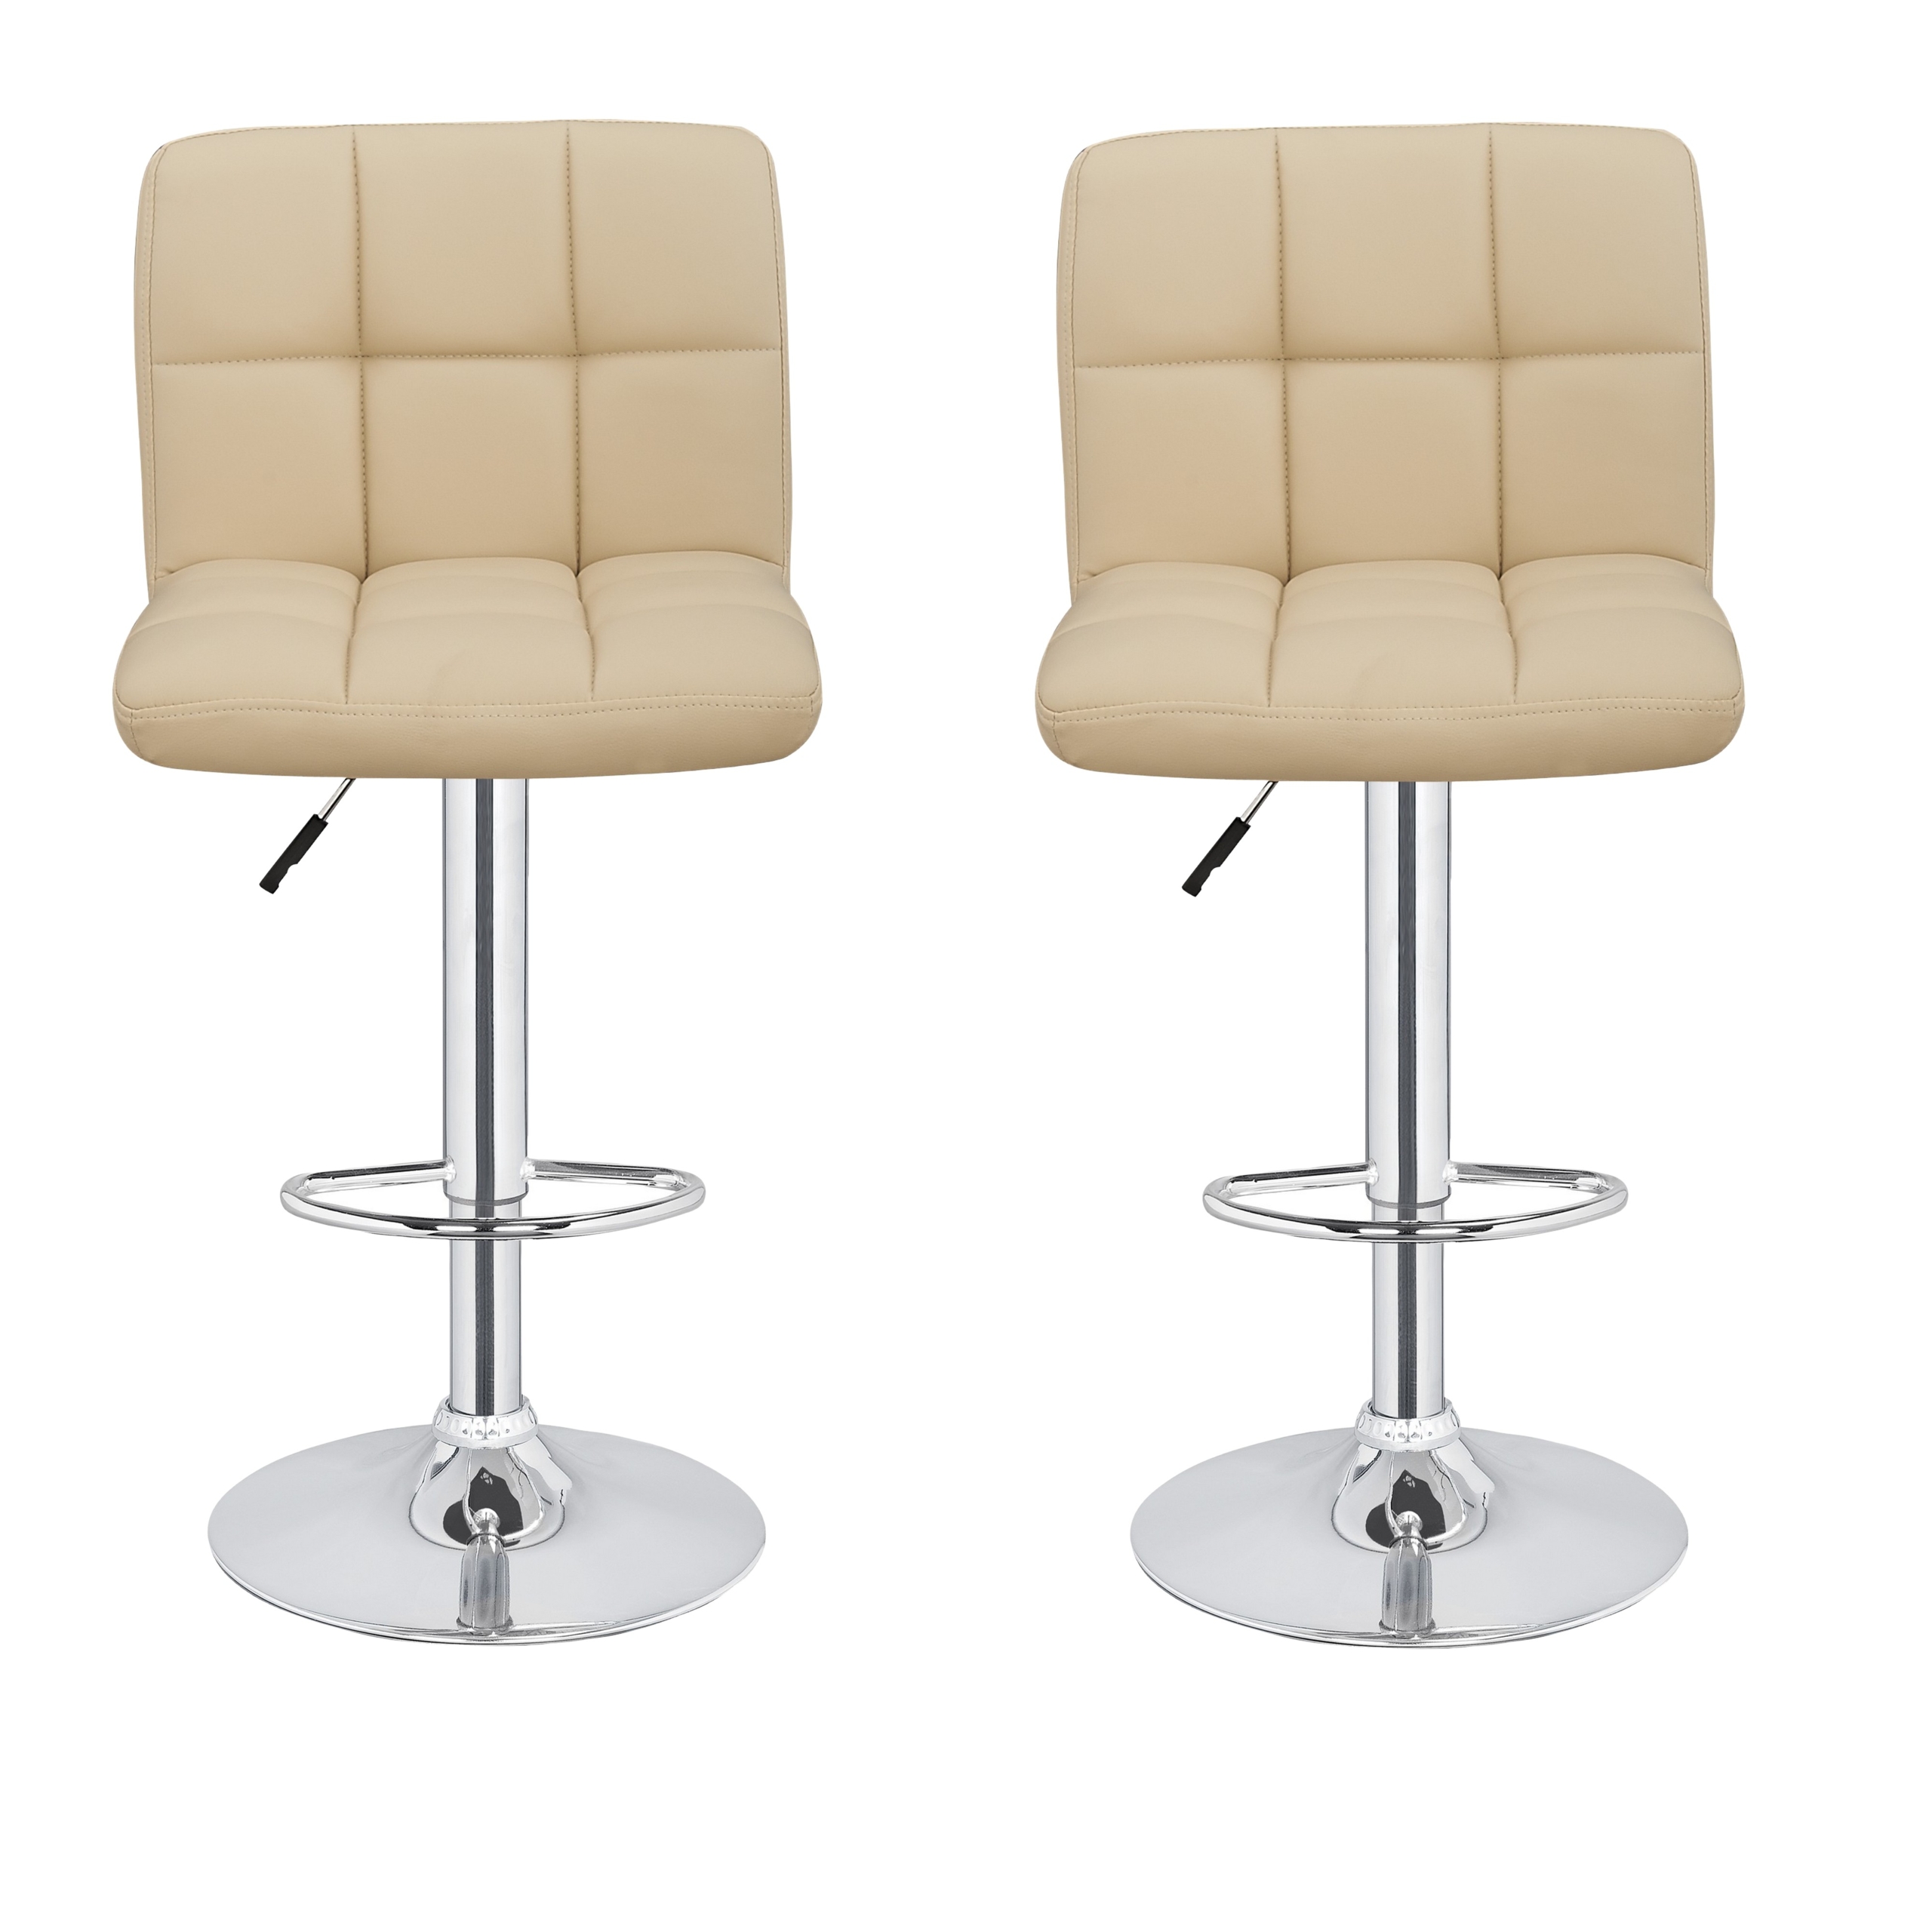 2 x Homegear M2 Contemporary Adjustable Swivel Faux Leather Bar Stools Cream